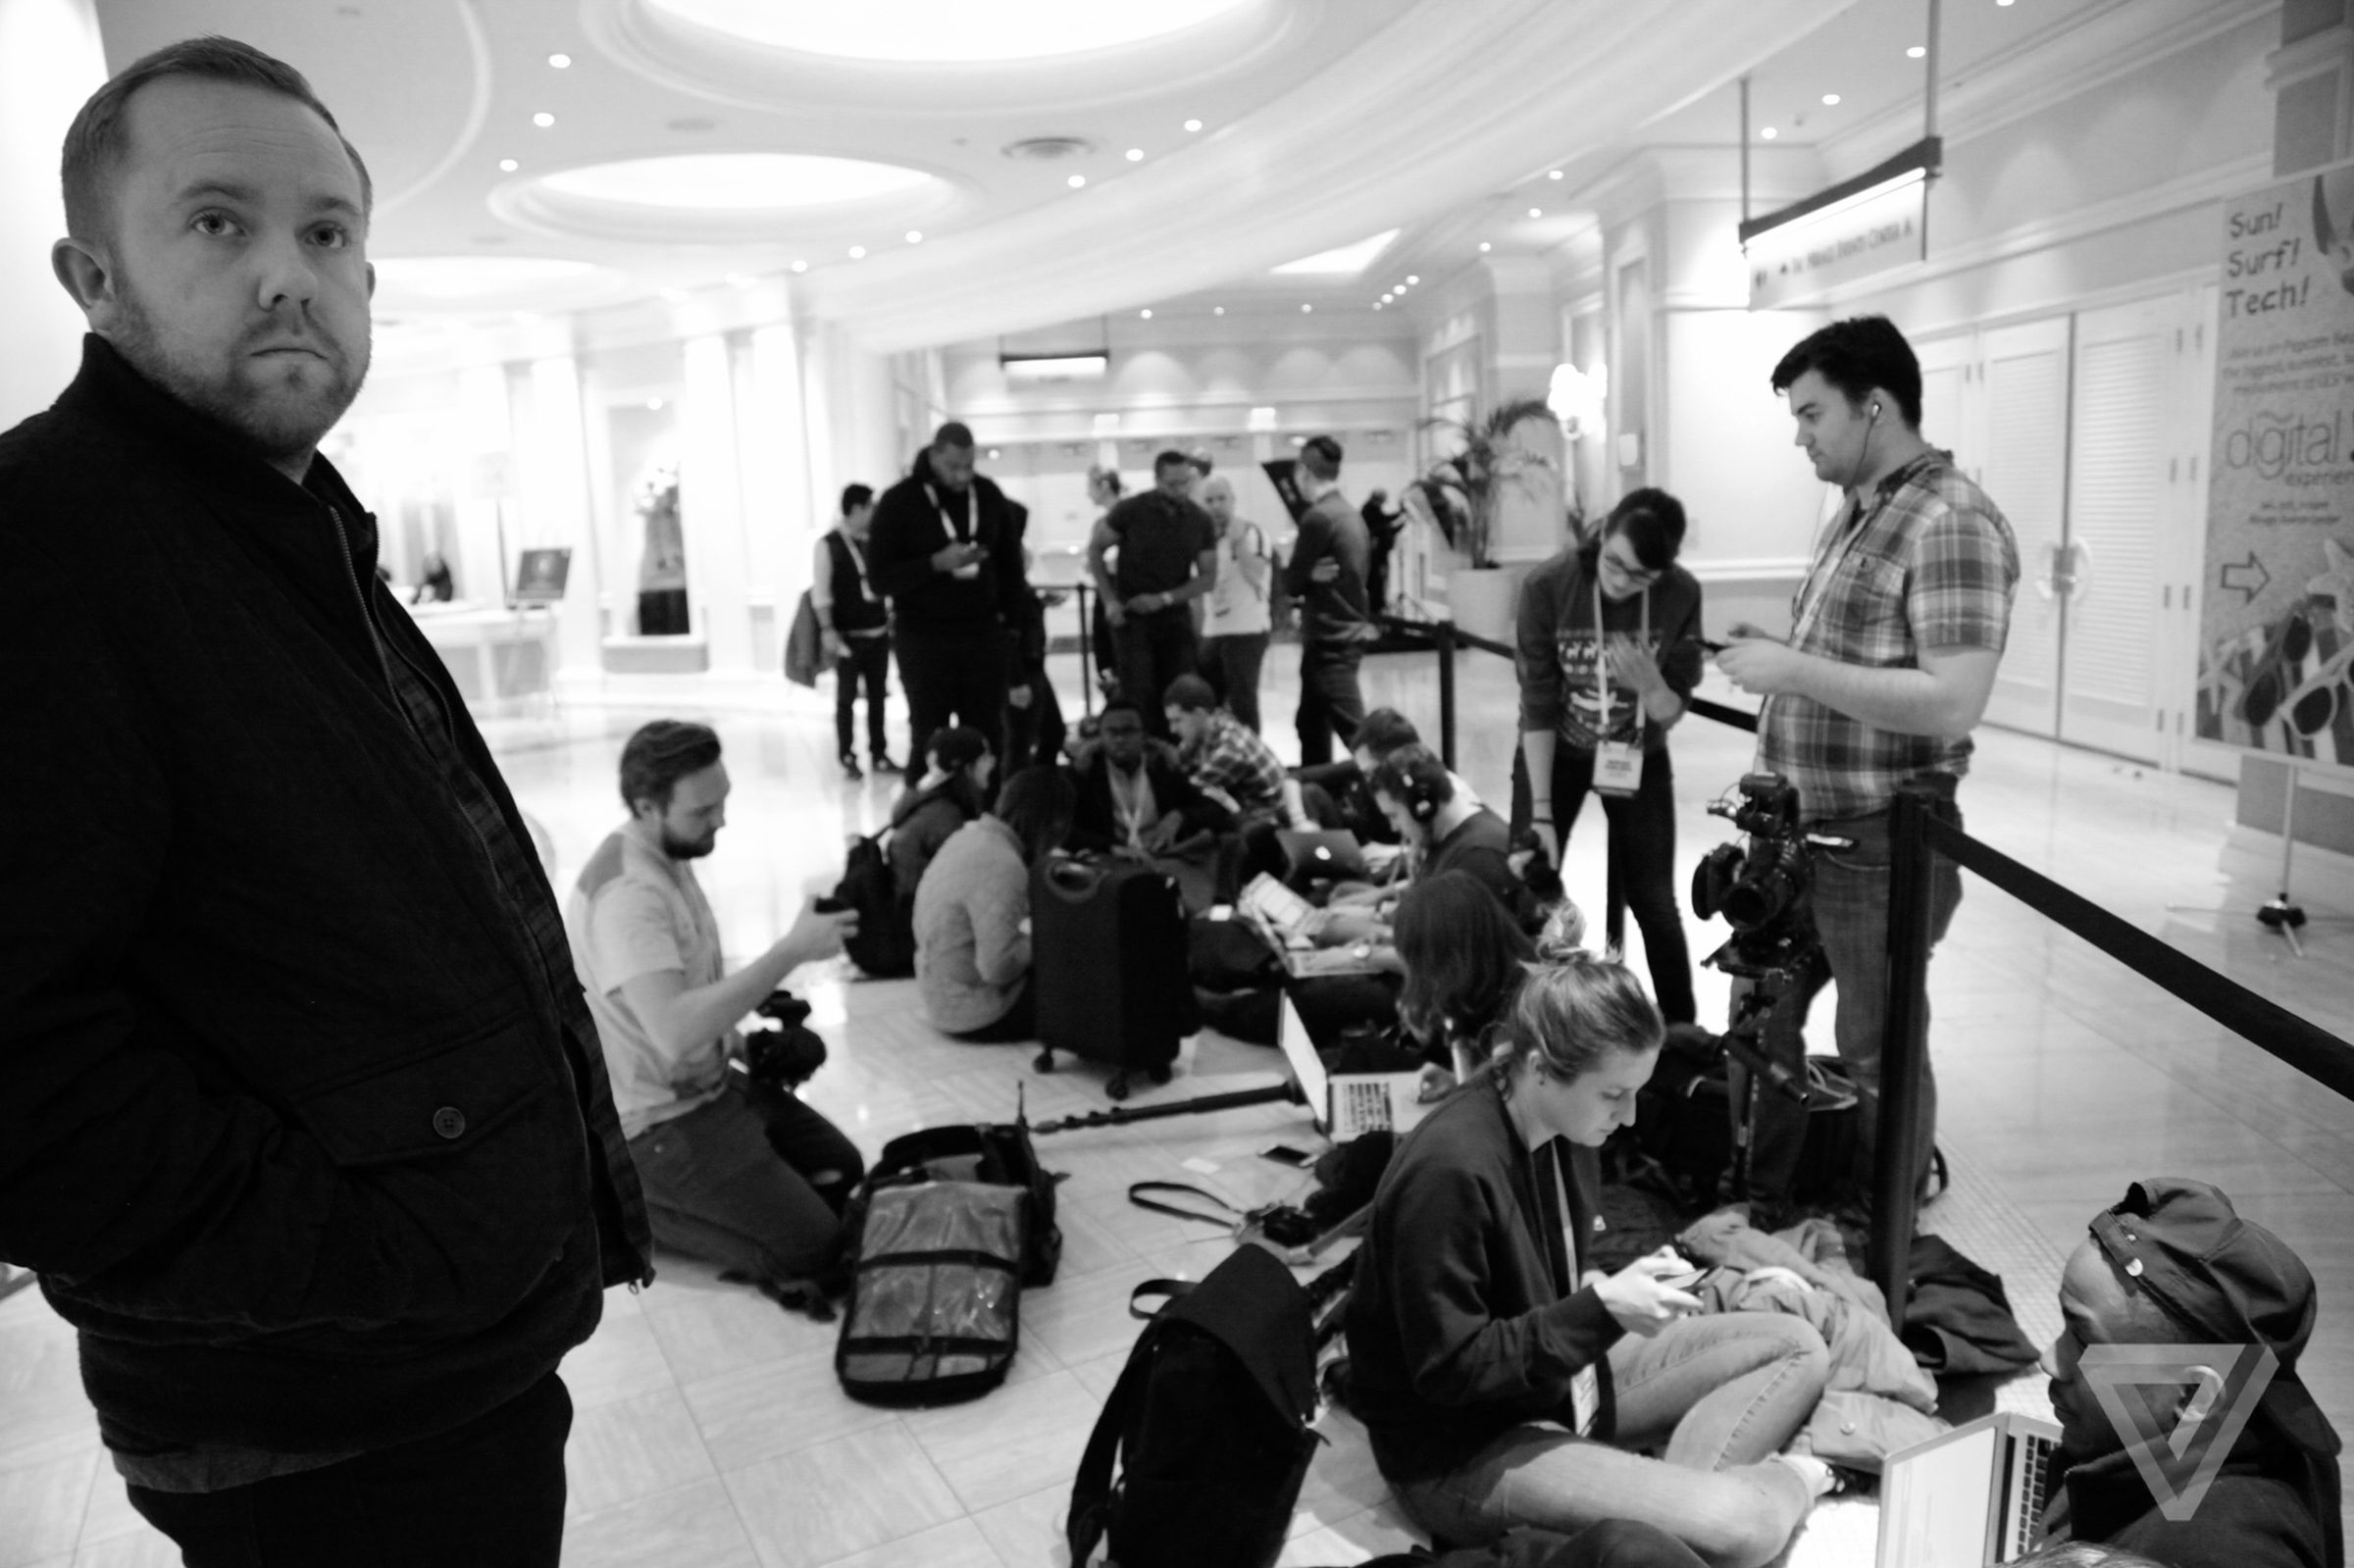 Behind the Scenes at CES 2016